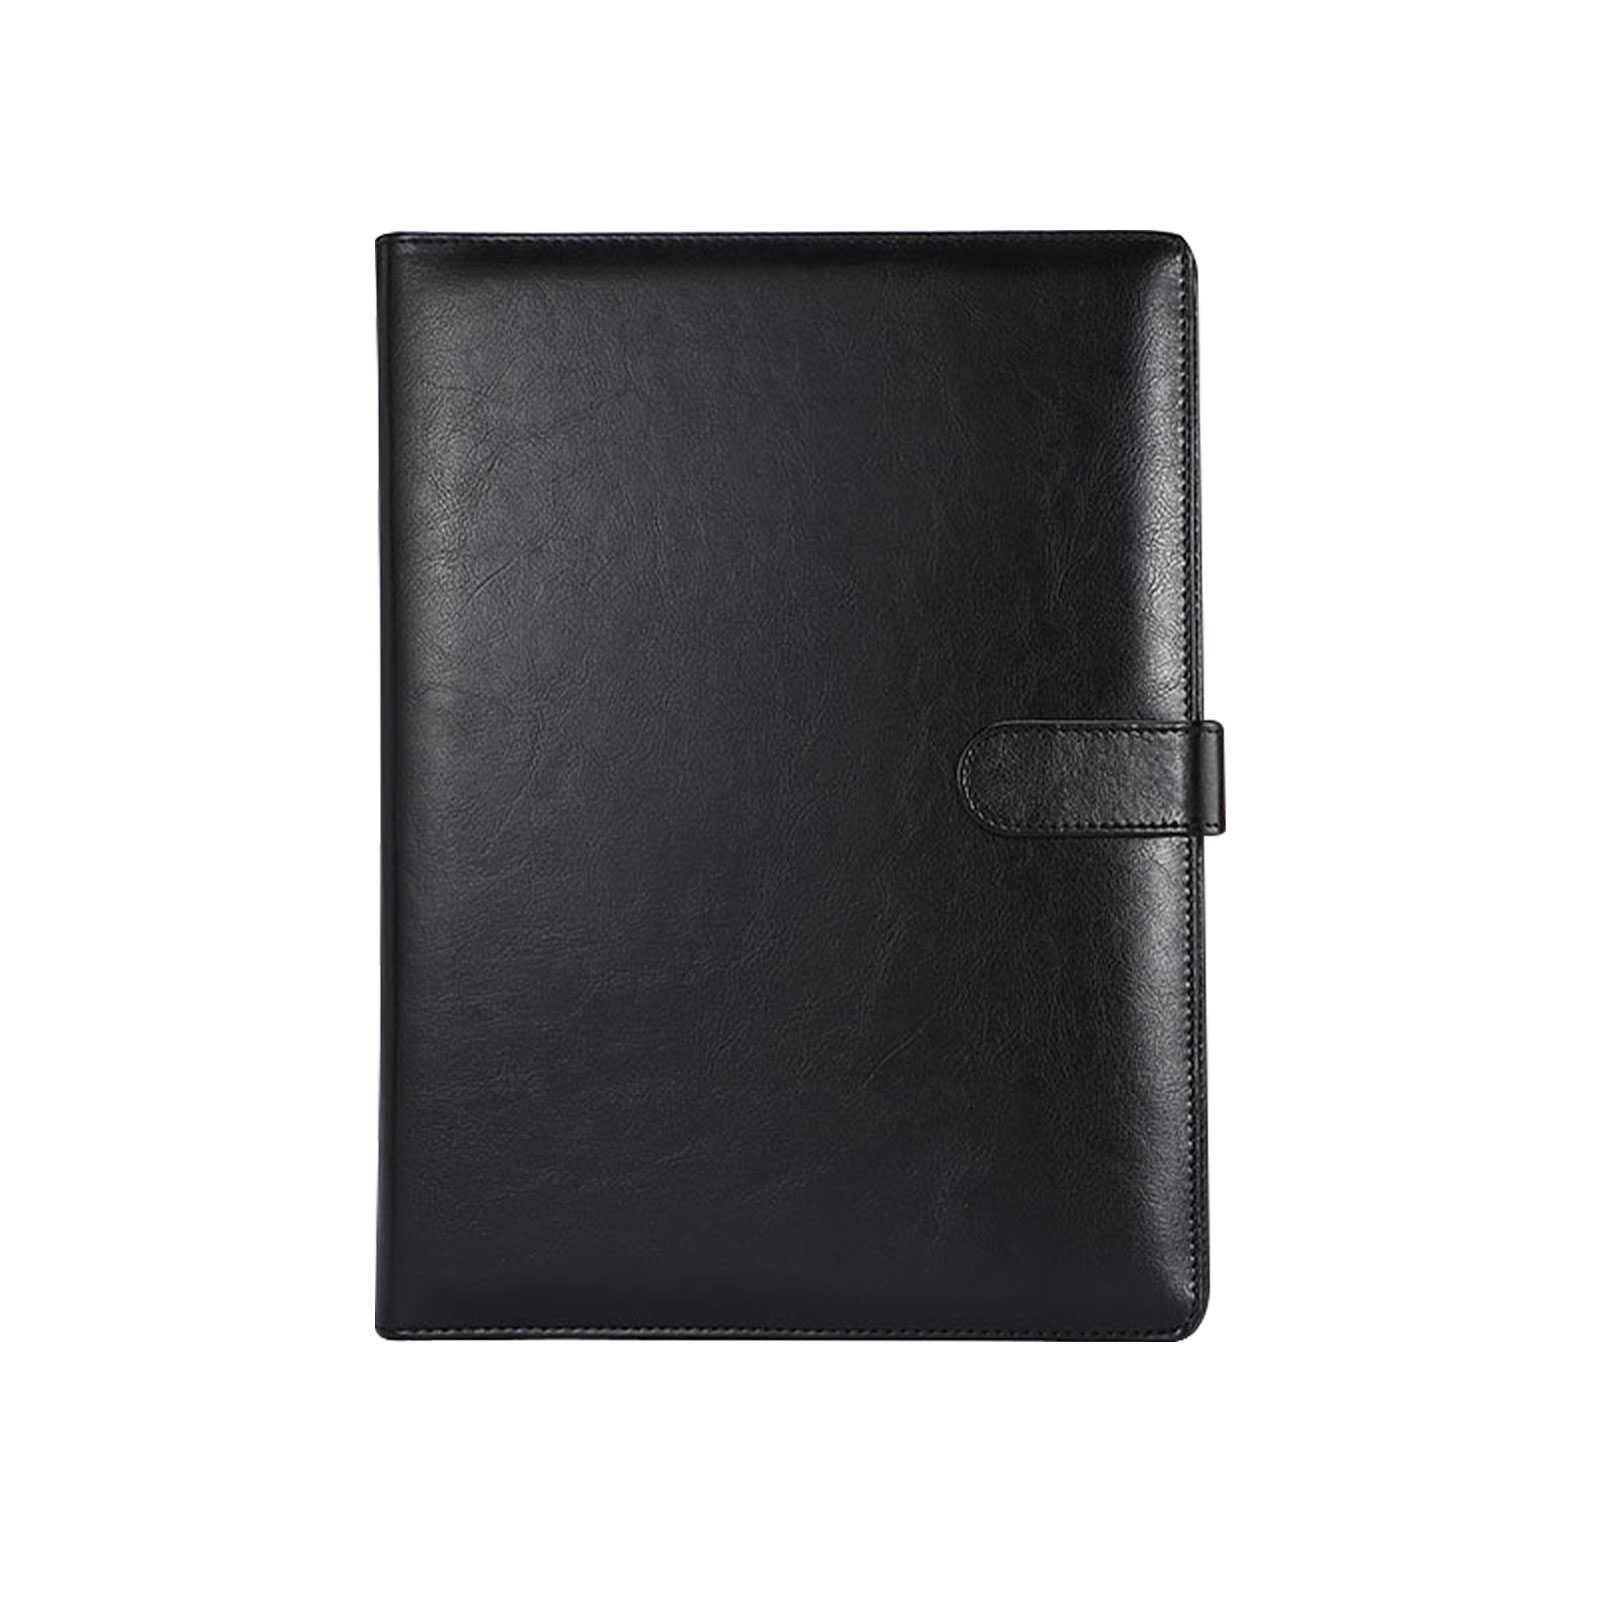 Padfolio Organizer For Document Portable Business Durable Magnetic Buckle PU Leather Practical Clip Card Holder With Note Paper